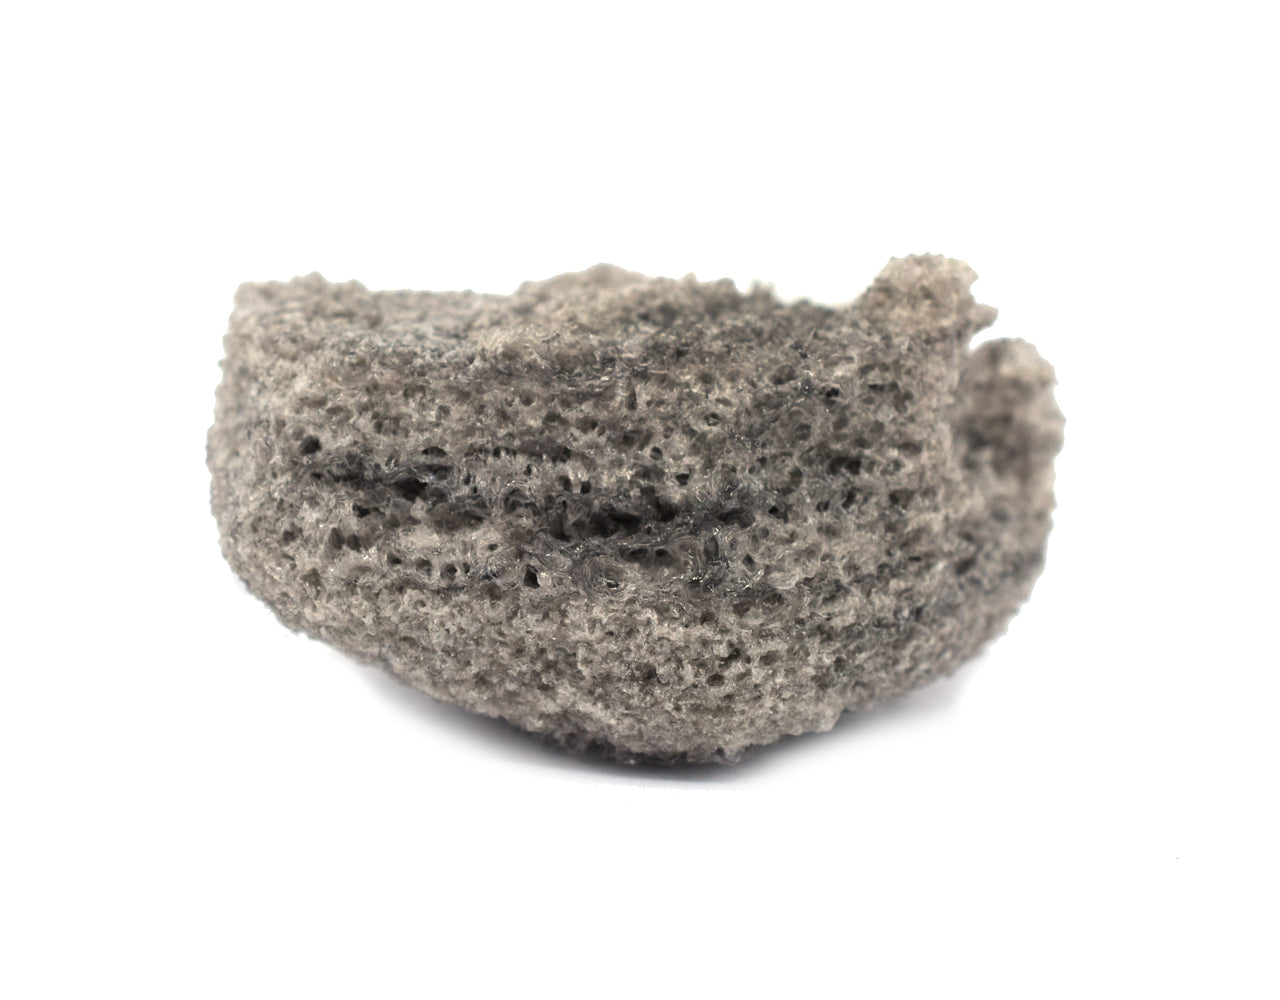 Raw Pumice Igneous Rock Specimen, 1" - Geologist Selected Samples - Eisco Labs